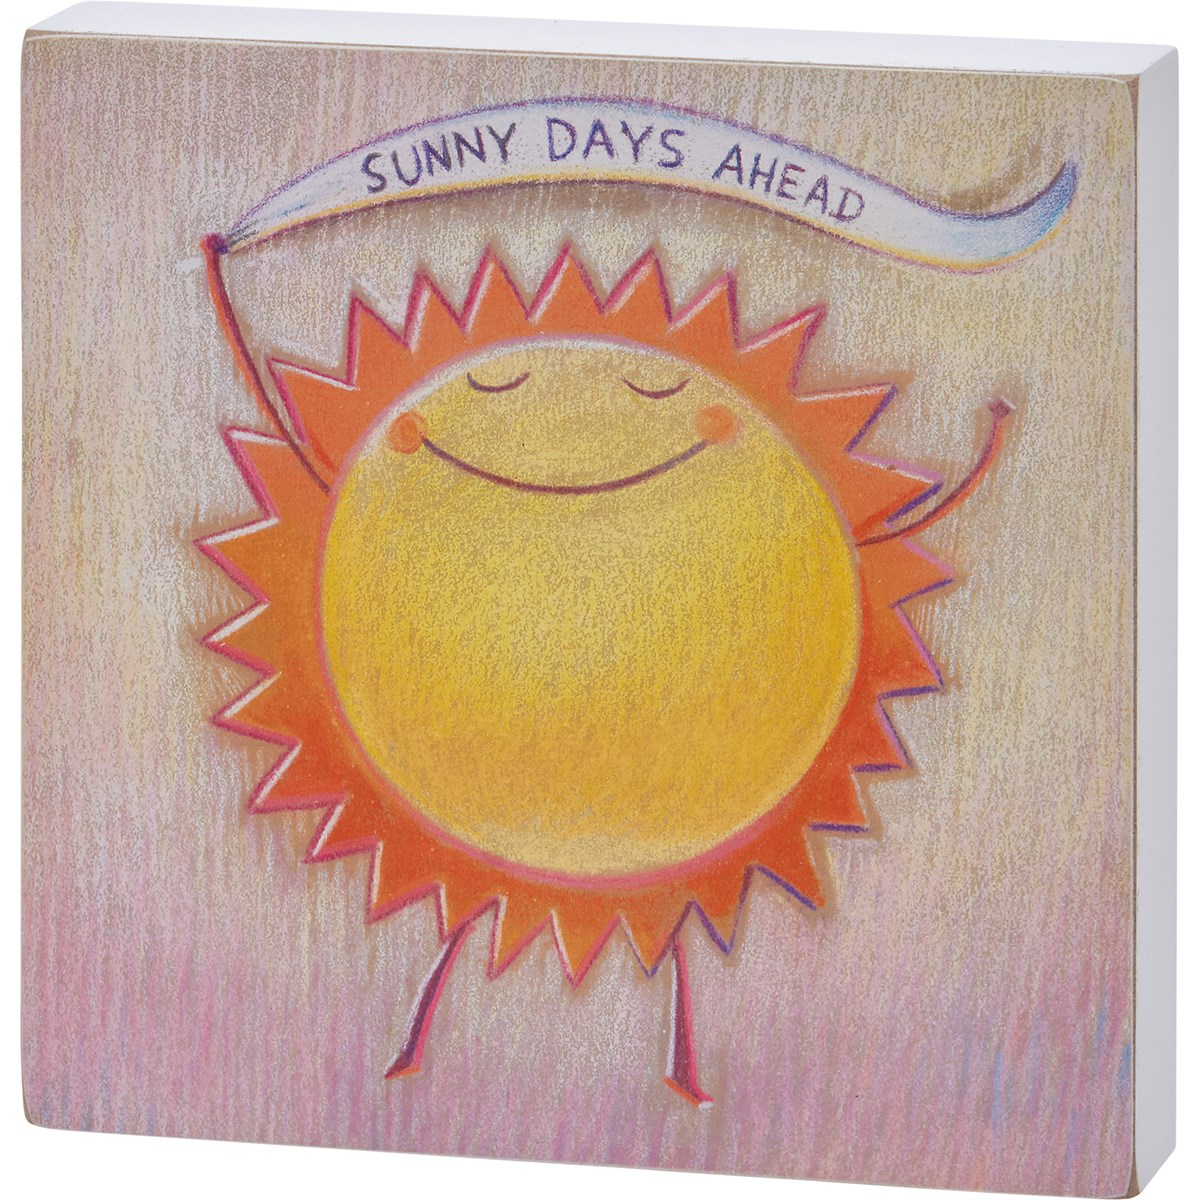 Sunny Days Ahead Block Sign - Wood, Paper